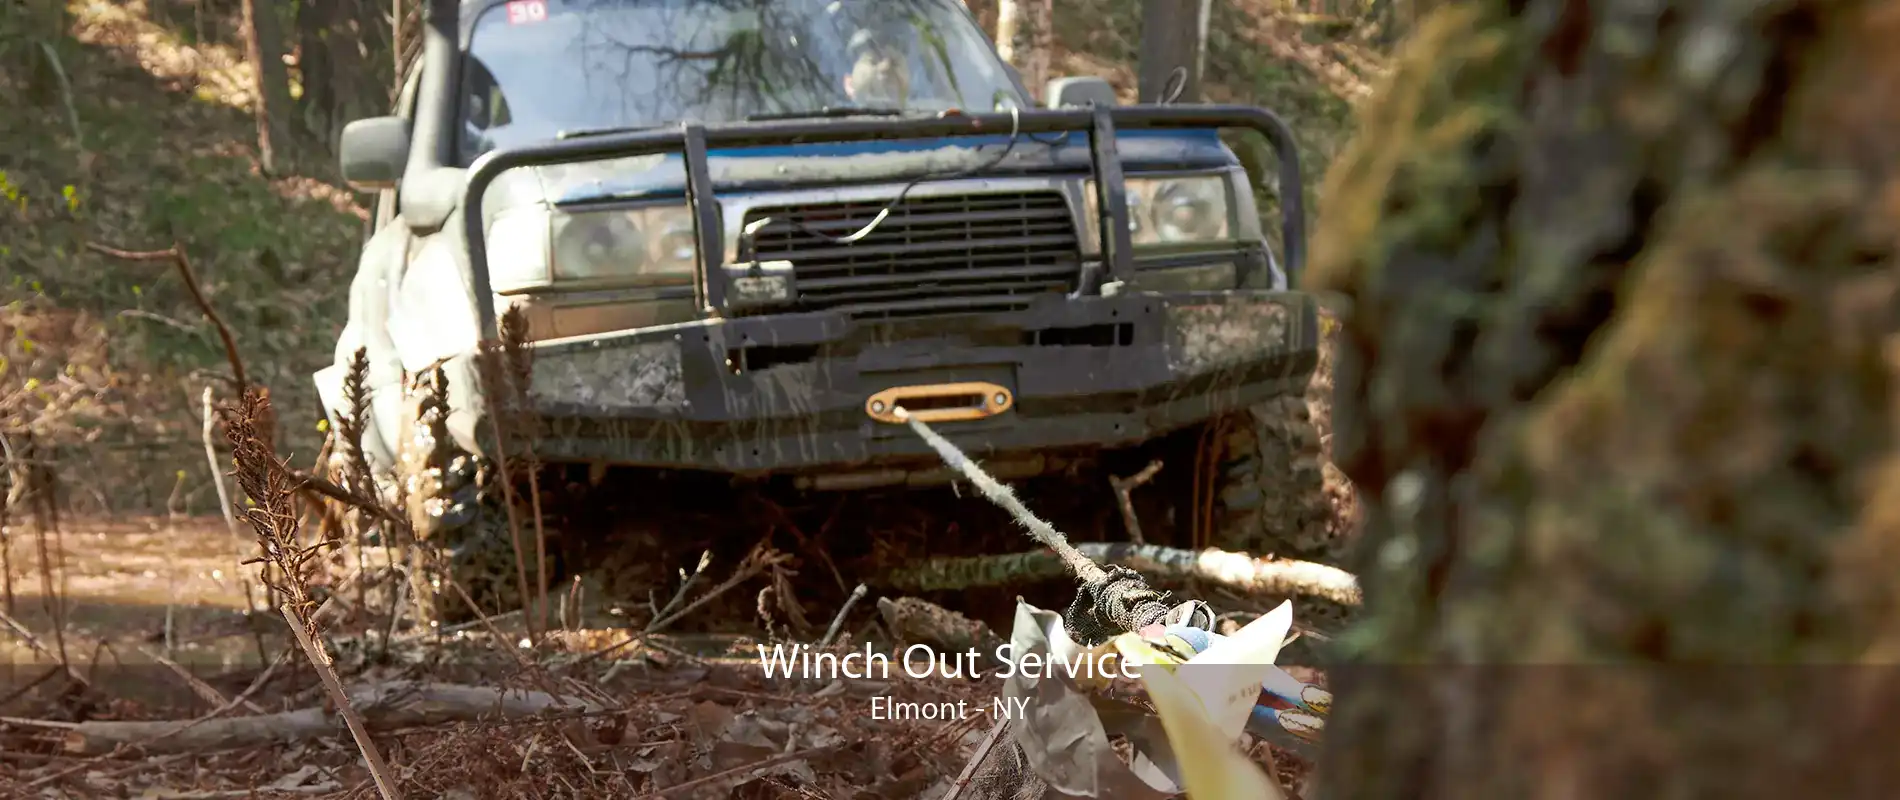 Winch Out Service Elmont - NY